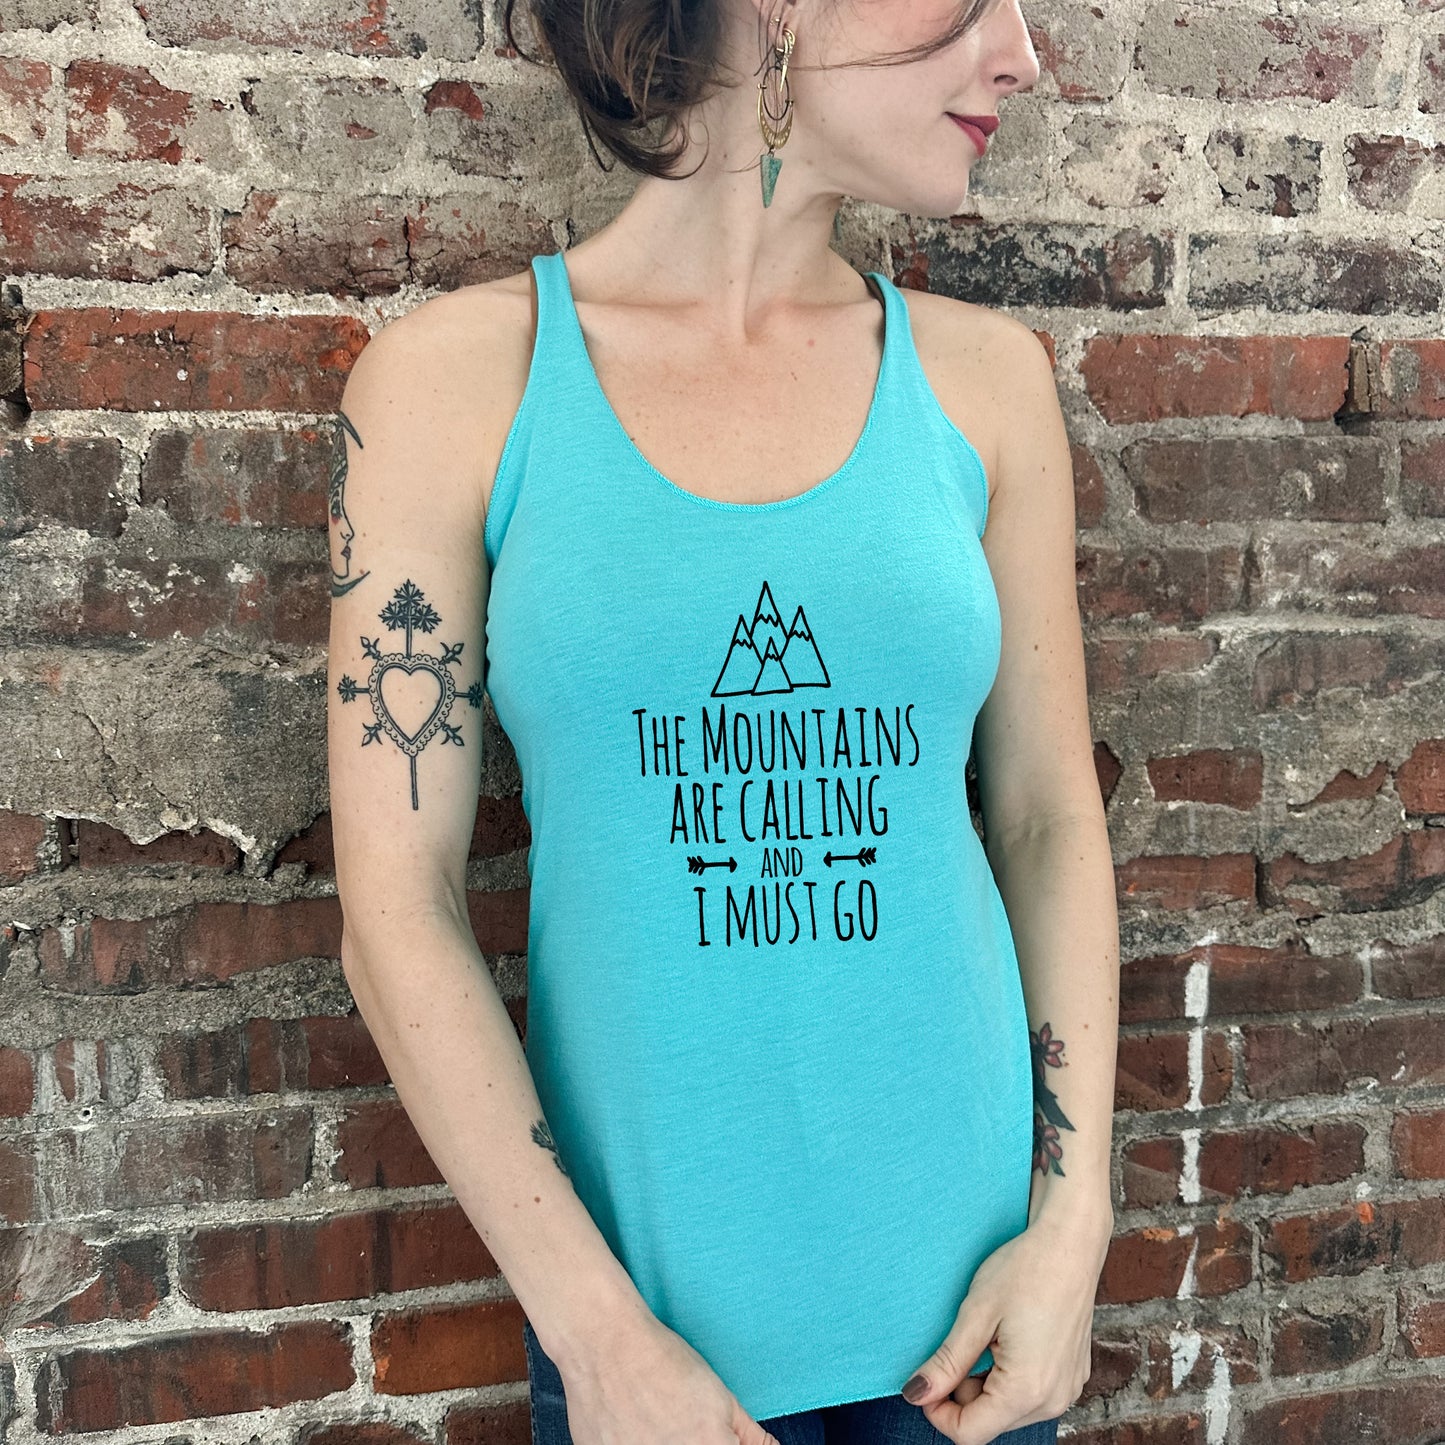 The Mountains Are Calling And I Must Go - Women's Tank - Heather Gray, Tahiti, or Envy